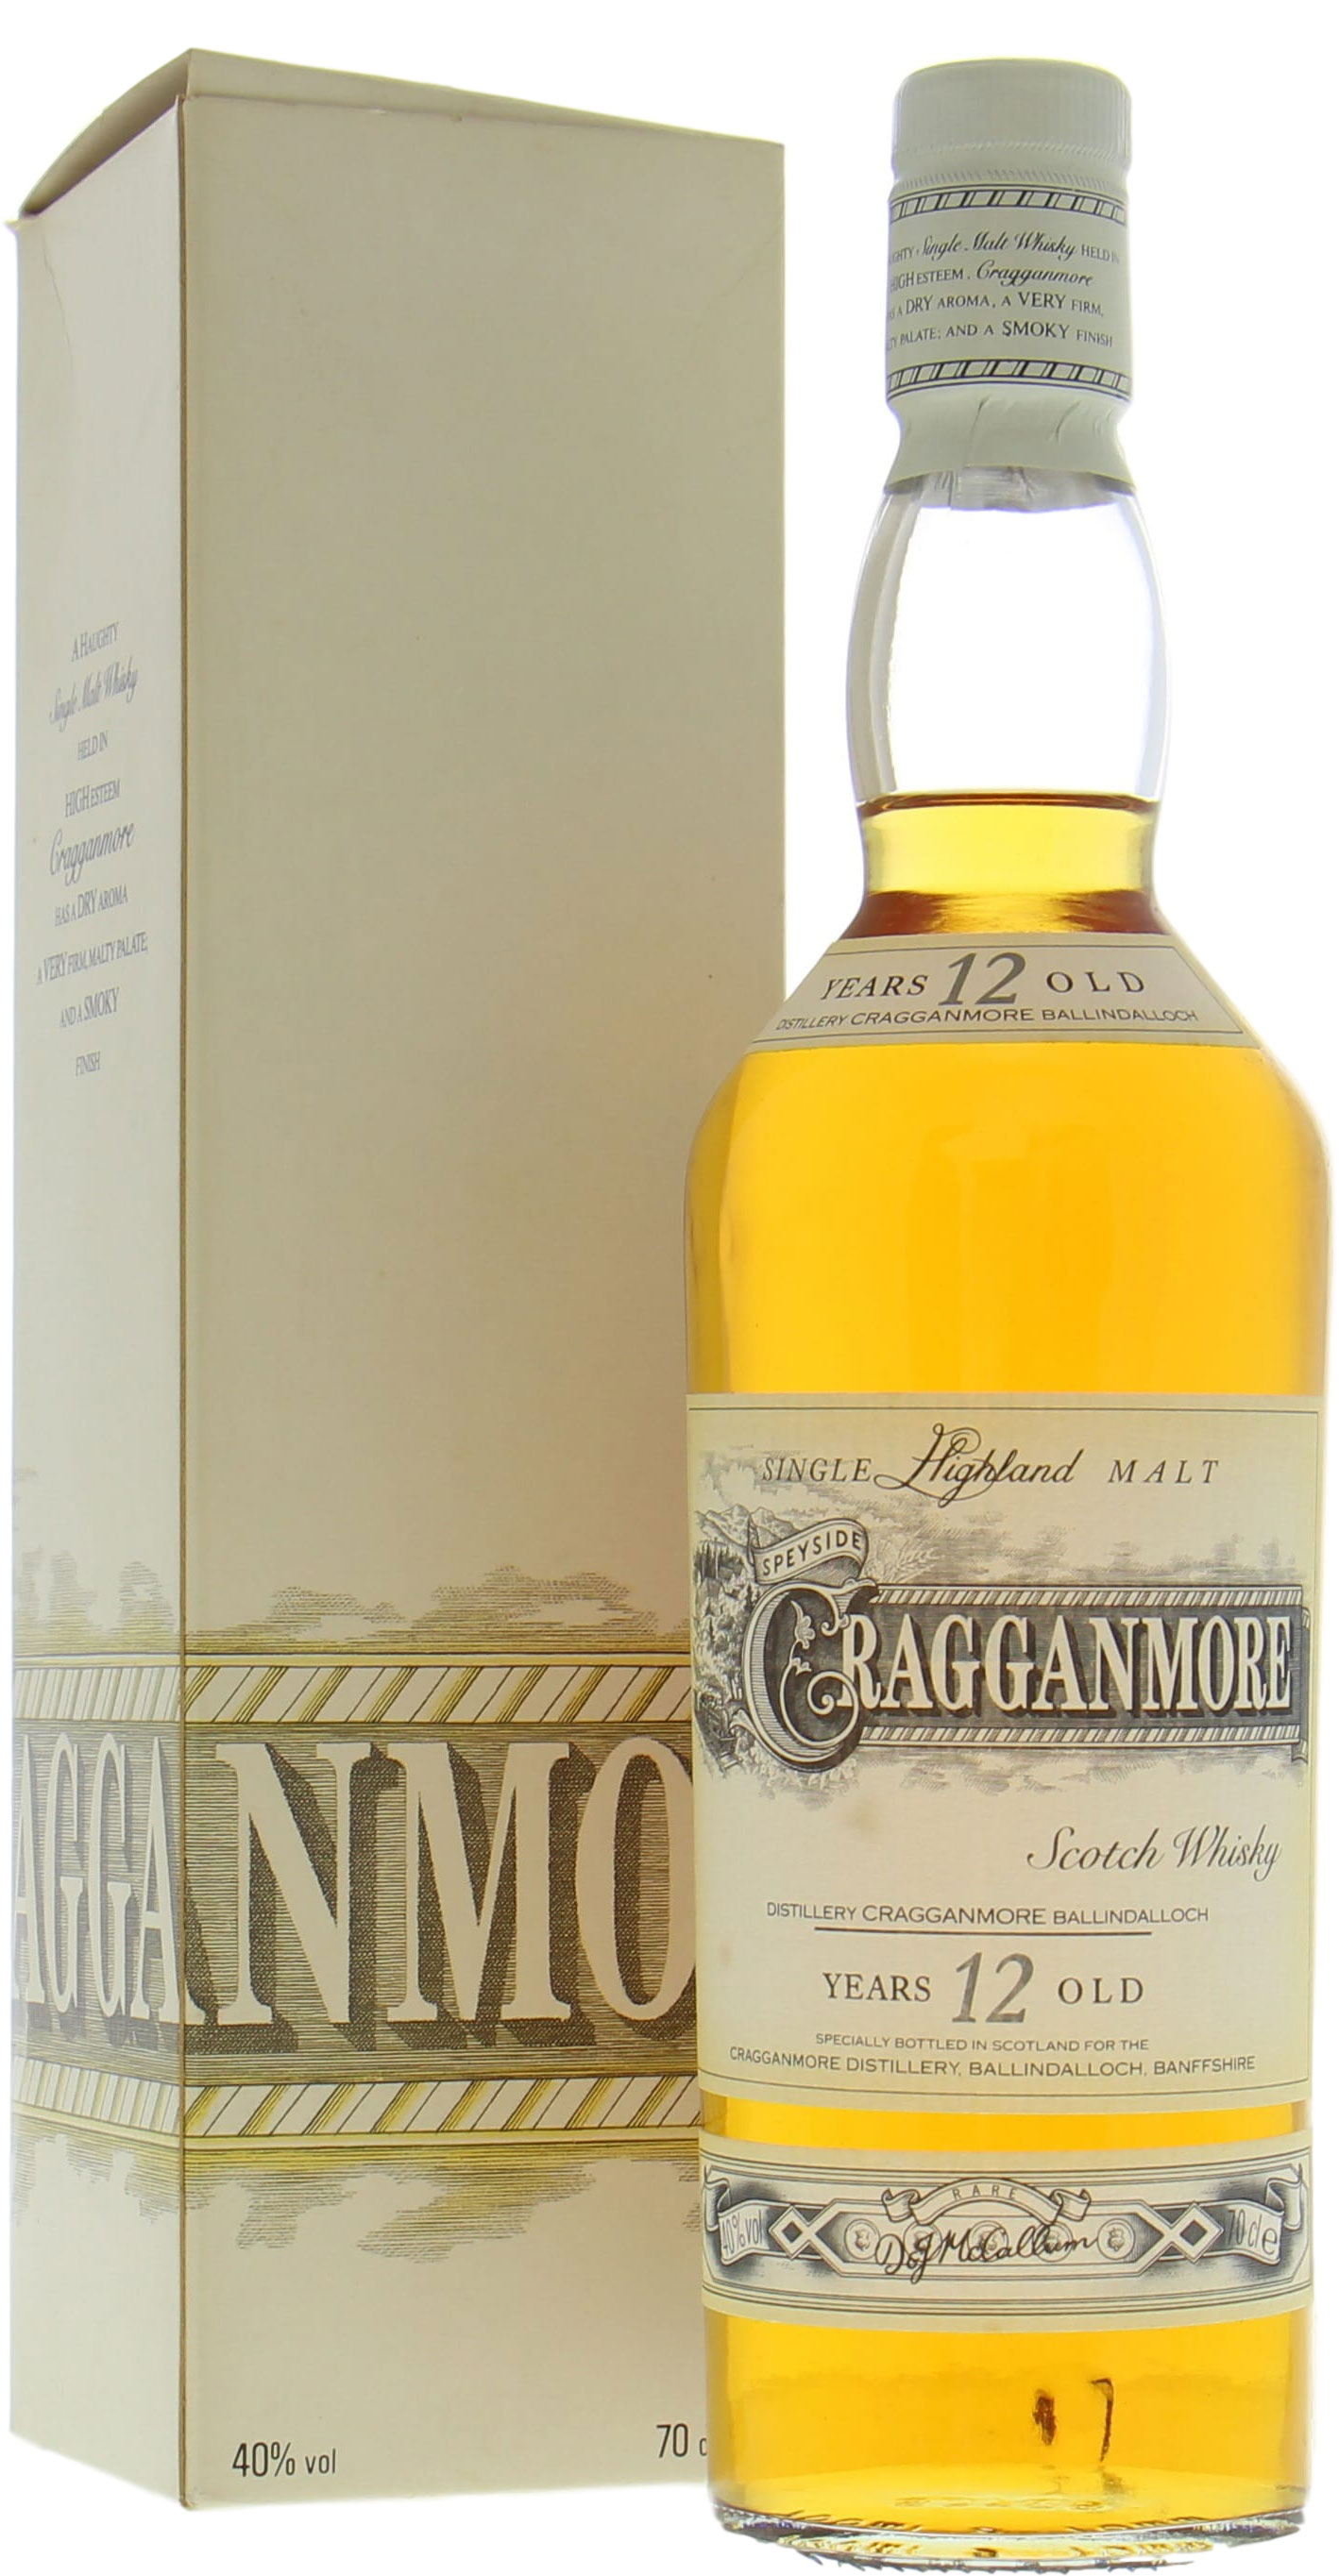 Cragganmore - 12 Years Old two-part label from the 1980's 40% NV Perfect